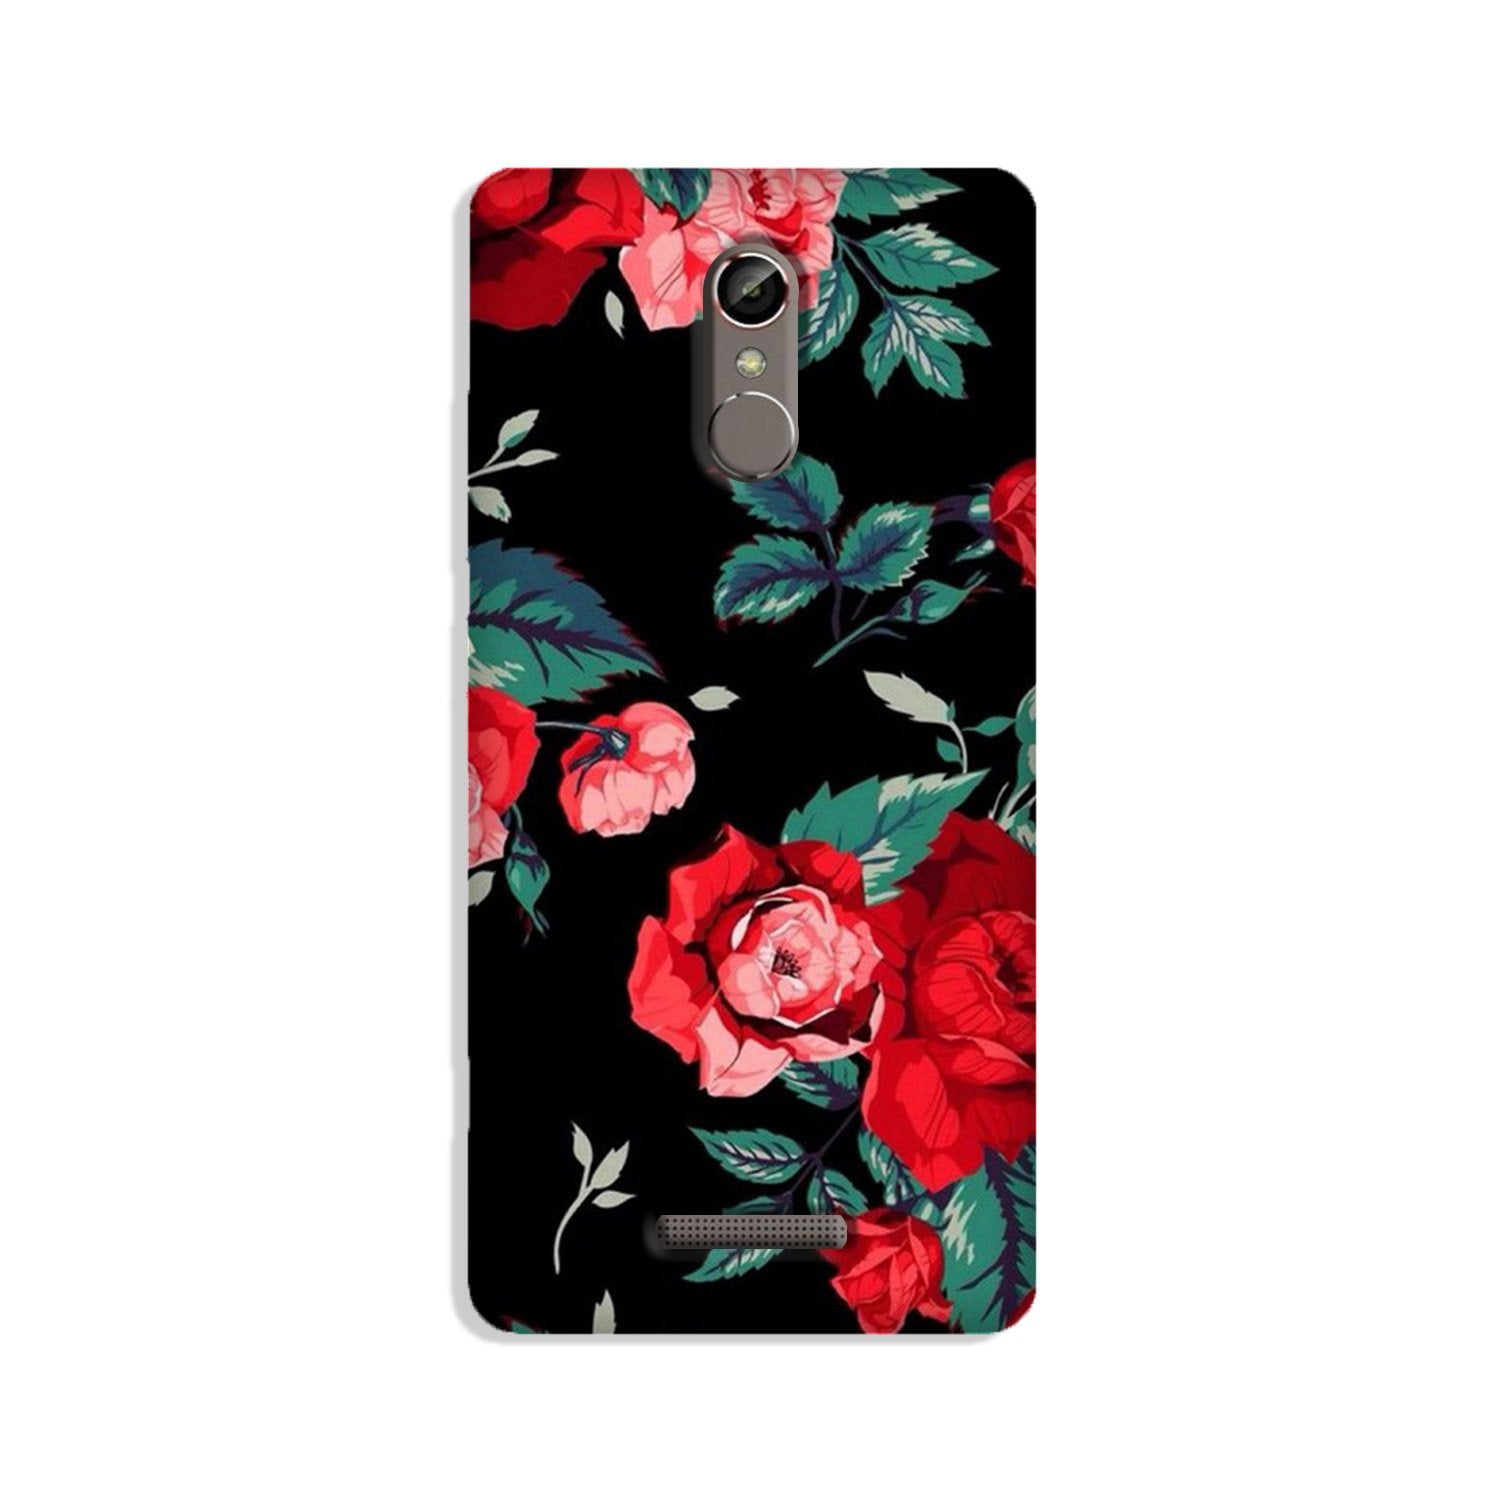 Red Rose2 Case for Gionee S6s